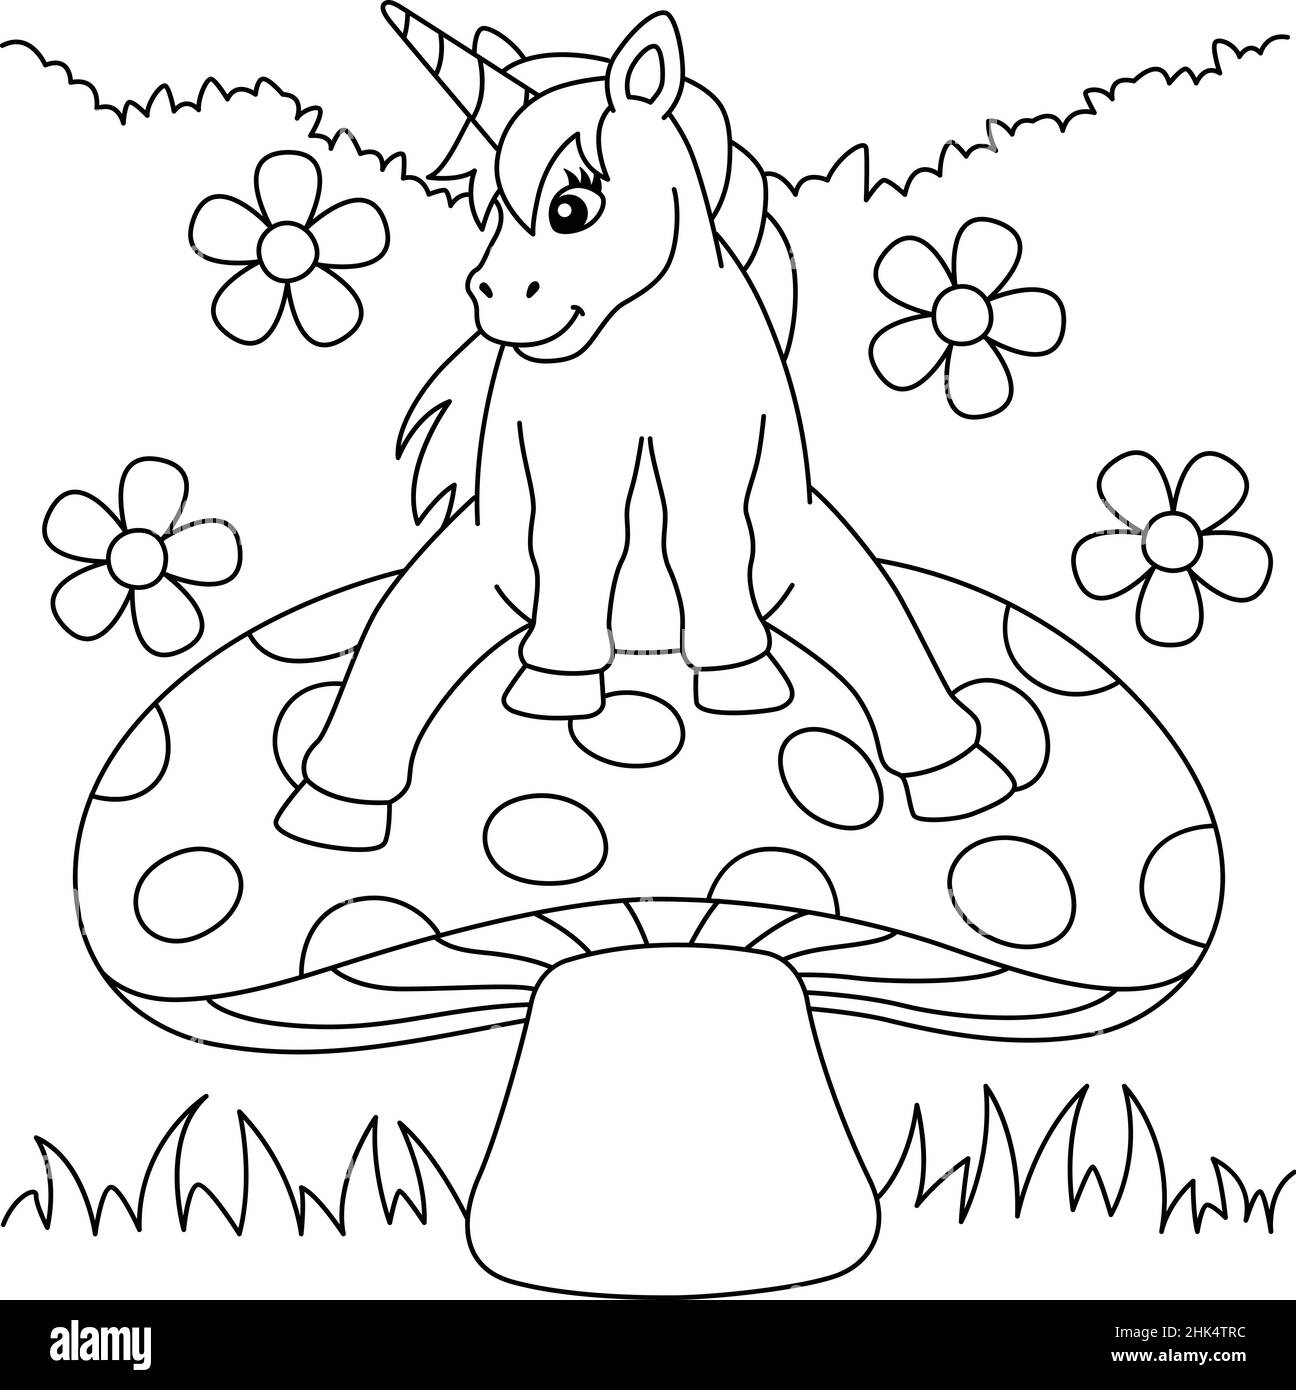 Unicorn Sitting On A Mushroom Coloring Page Stock Vector